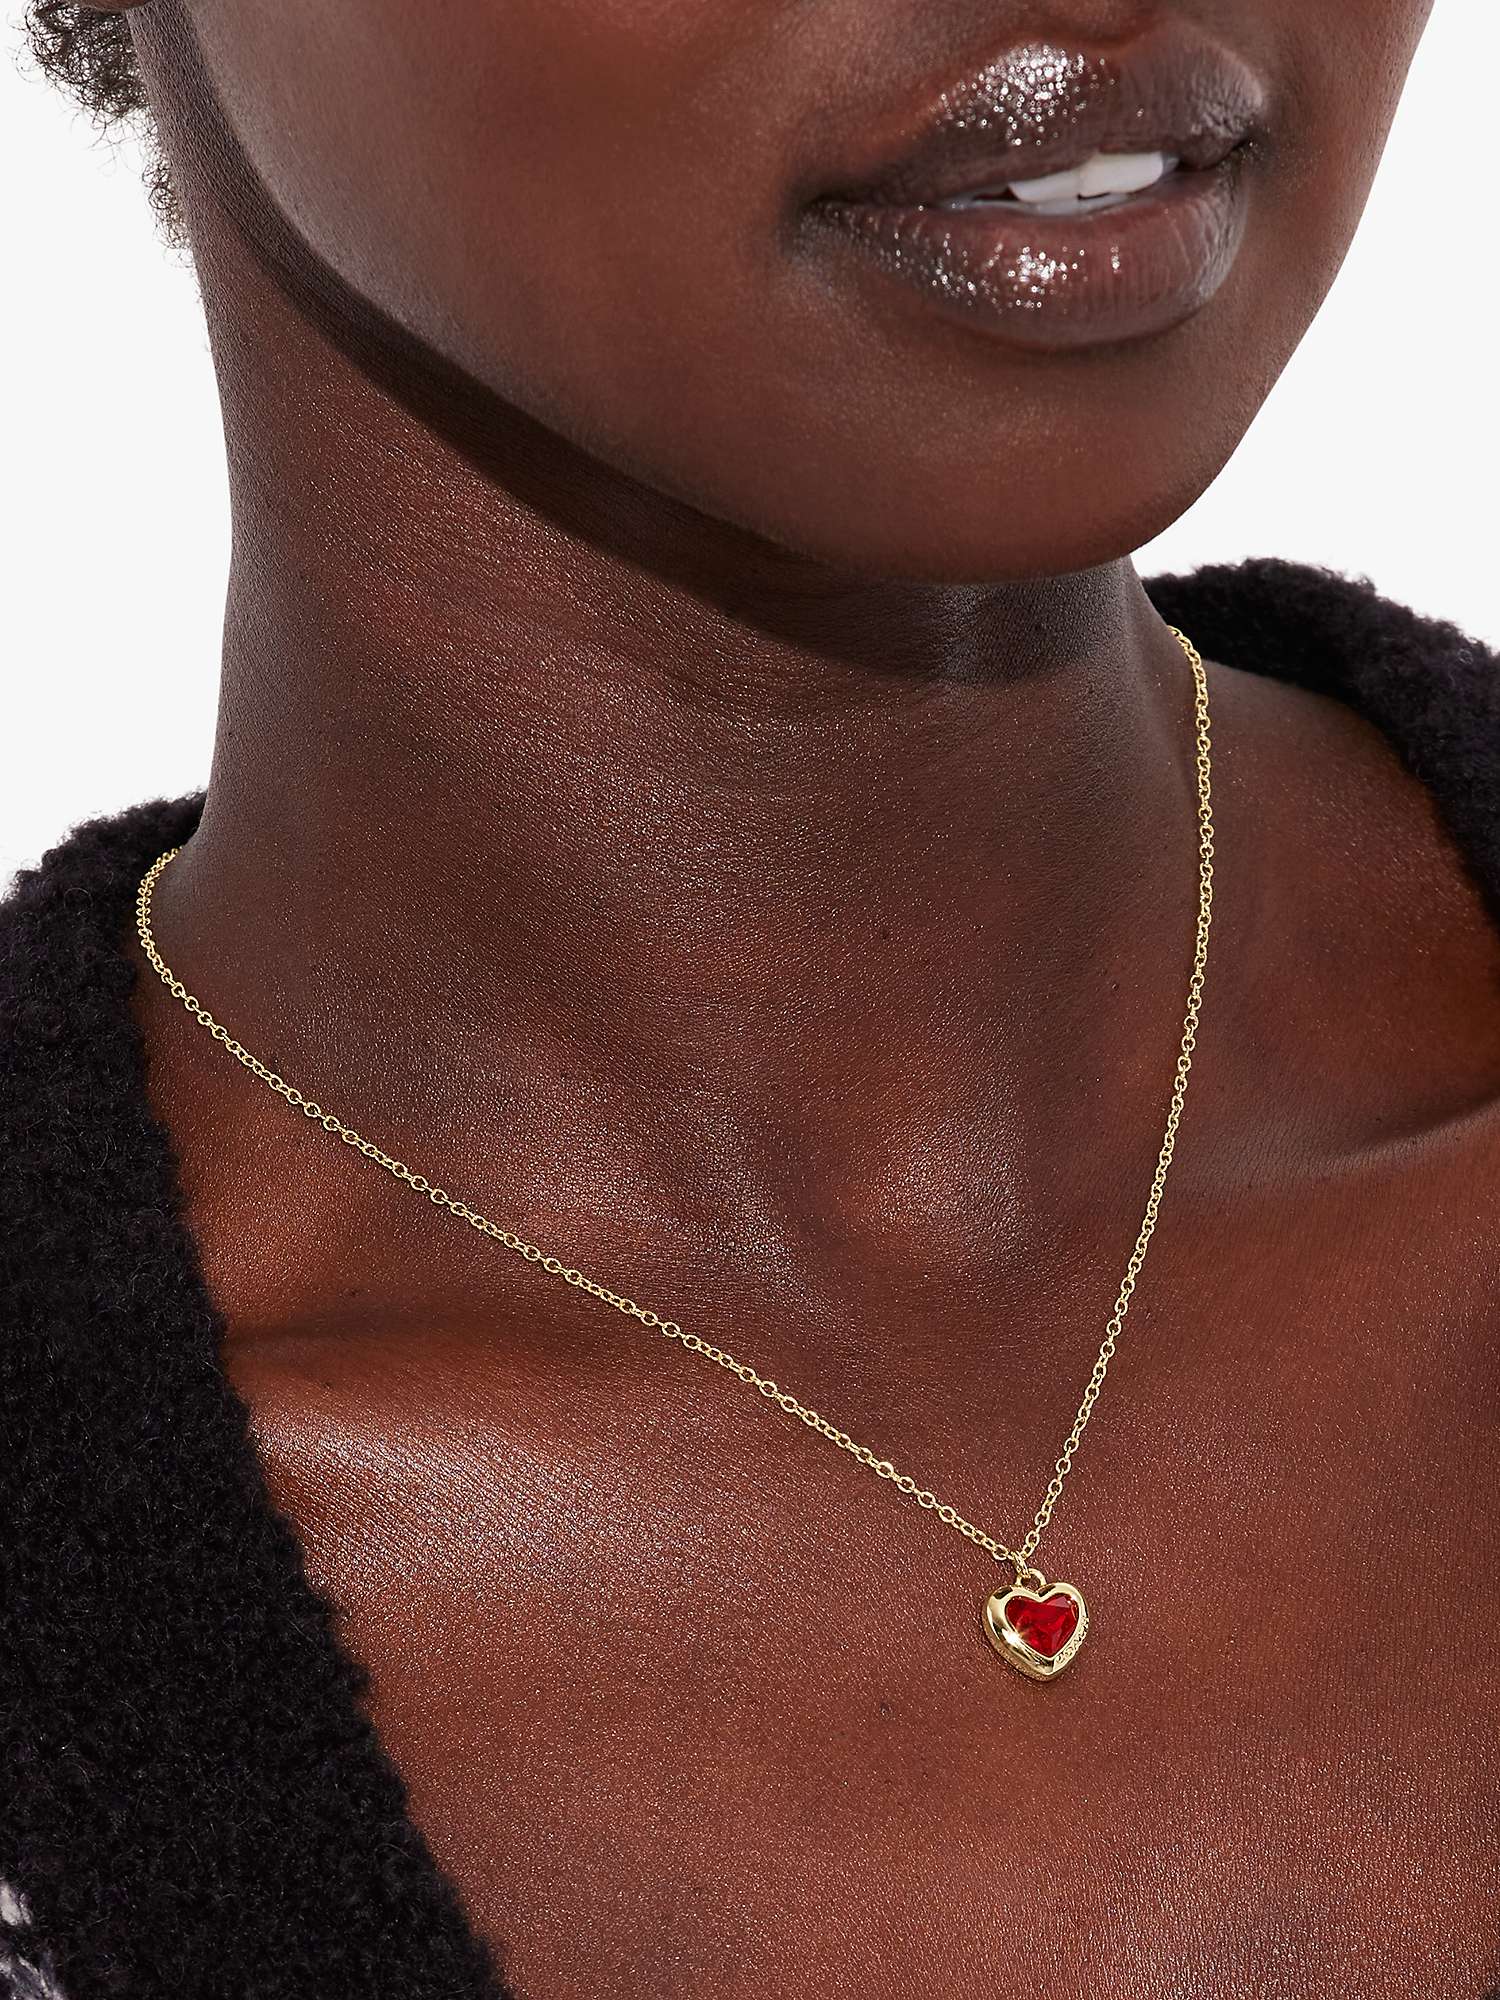 Coach Crystal Heart Pendant Necklace, Gold/Red at John Lewis & Partners